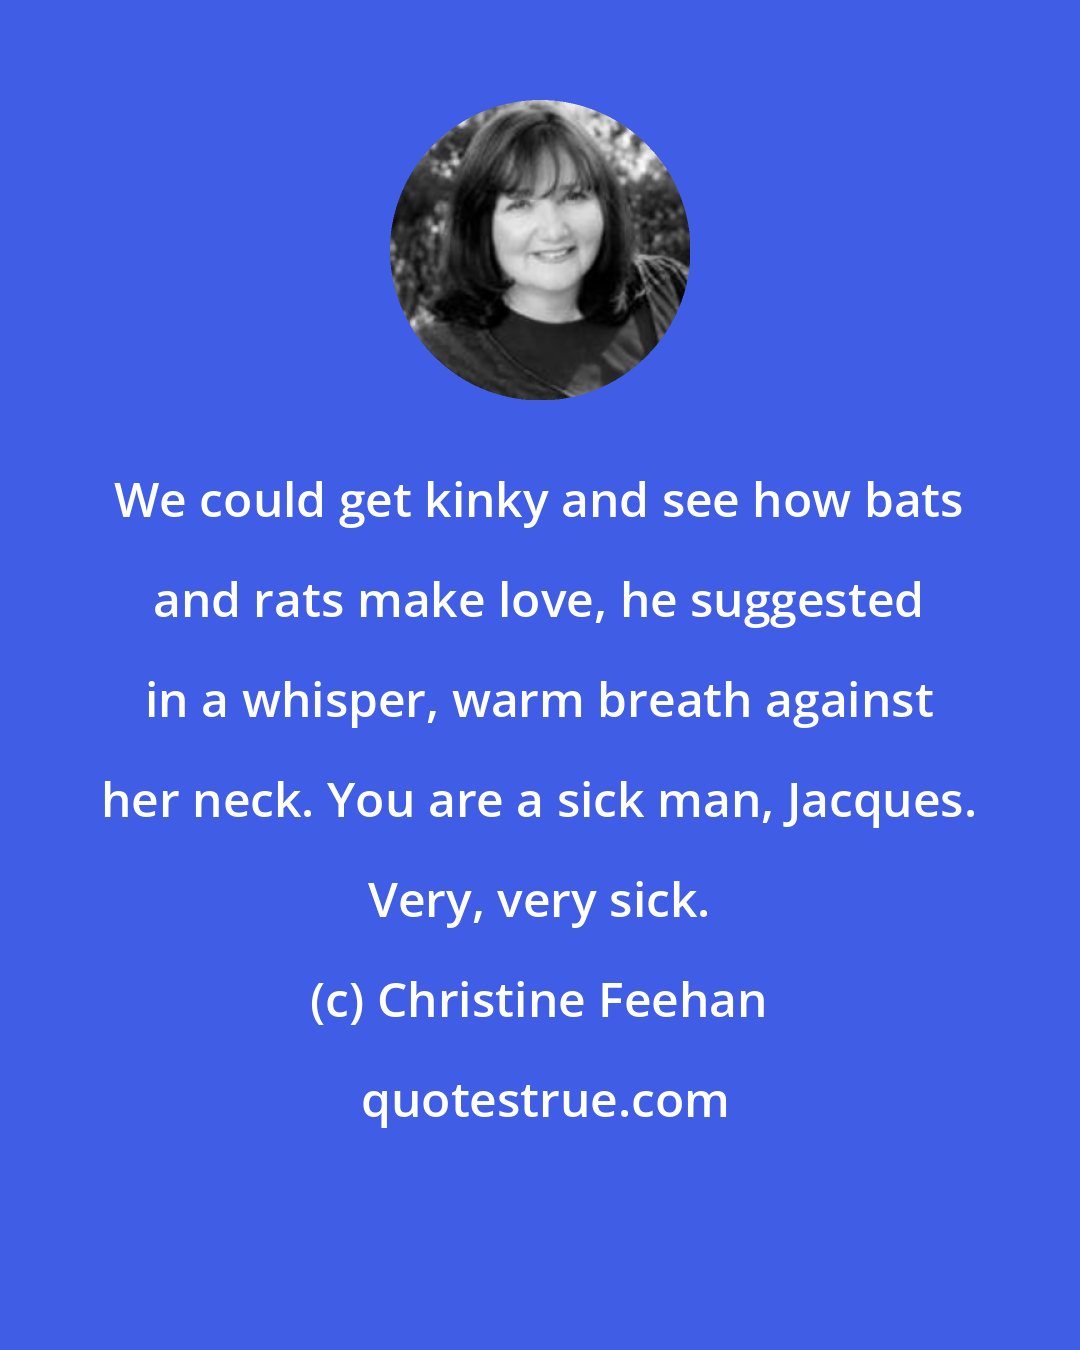 Christine Feehan: We could get kinky and see how bats and rats make love, he suggested in a whisper, warm breath against her neck. You are a sick man, Jacques. Very, very sick.